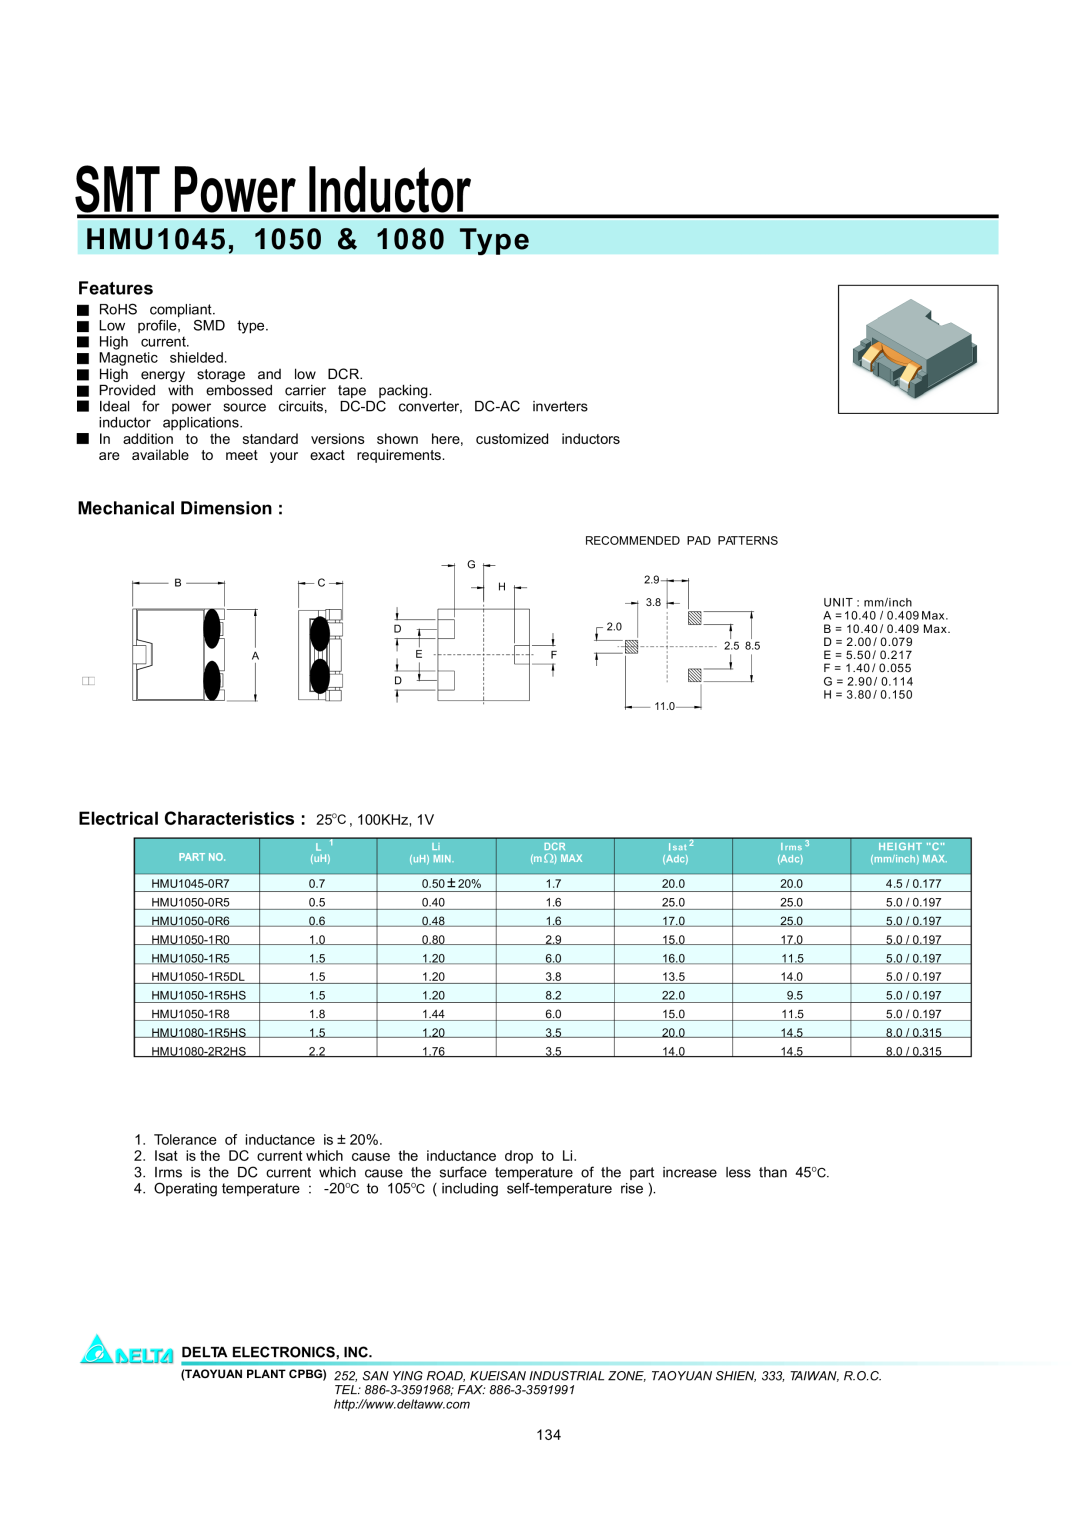 Delta Electronics manual SMT Power Inductor, HMU1045, 1050 & 1080 Type, Features, Mechanical Dimension 